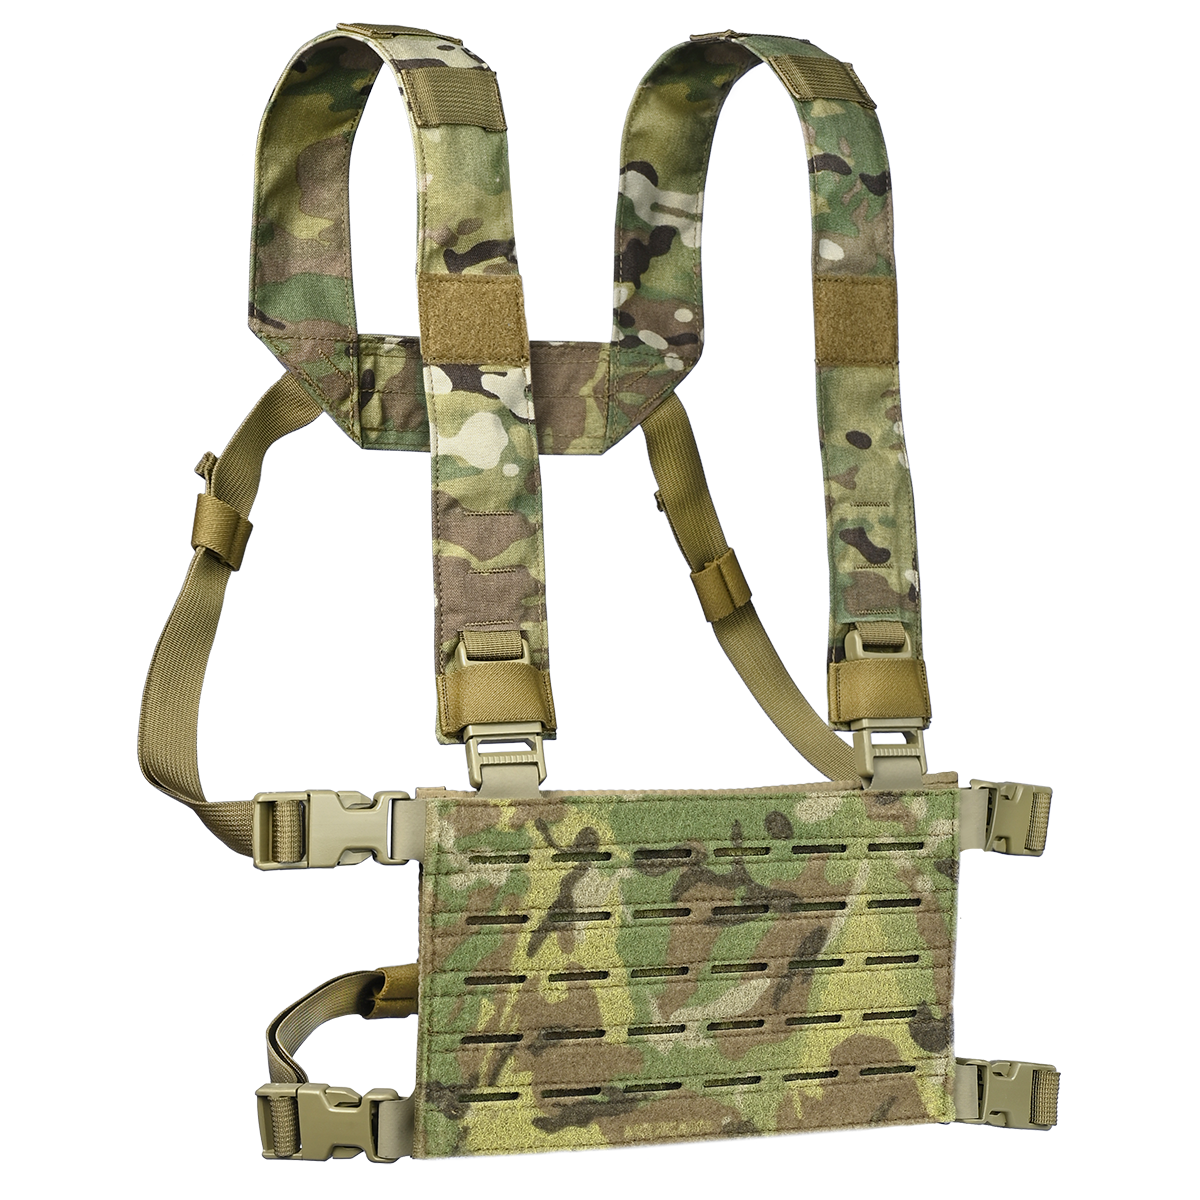 Micro Molle Chest Rig: Edge Works